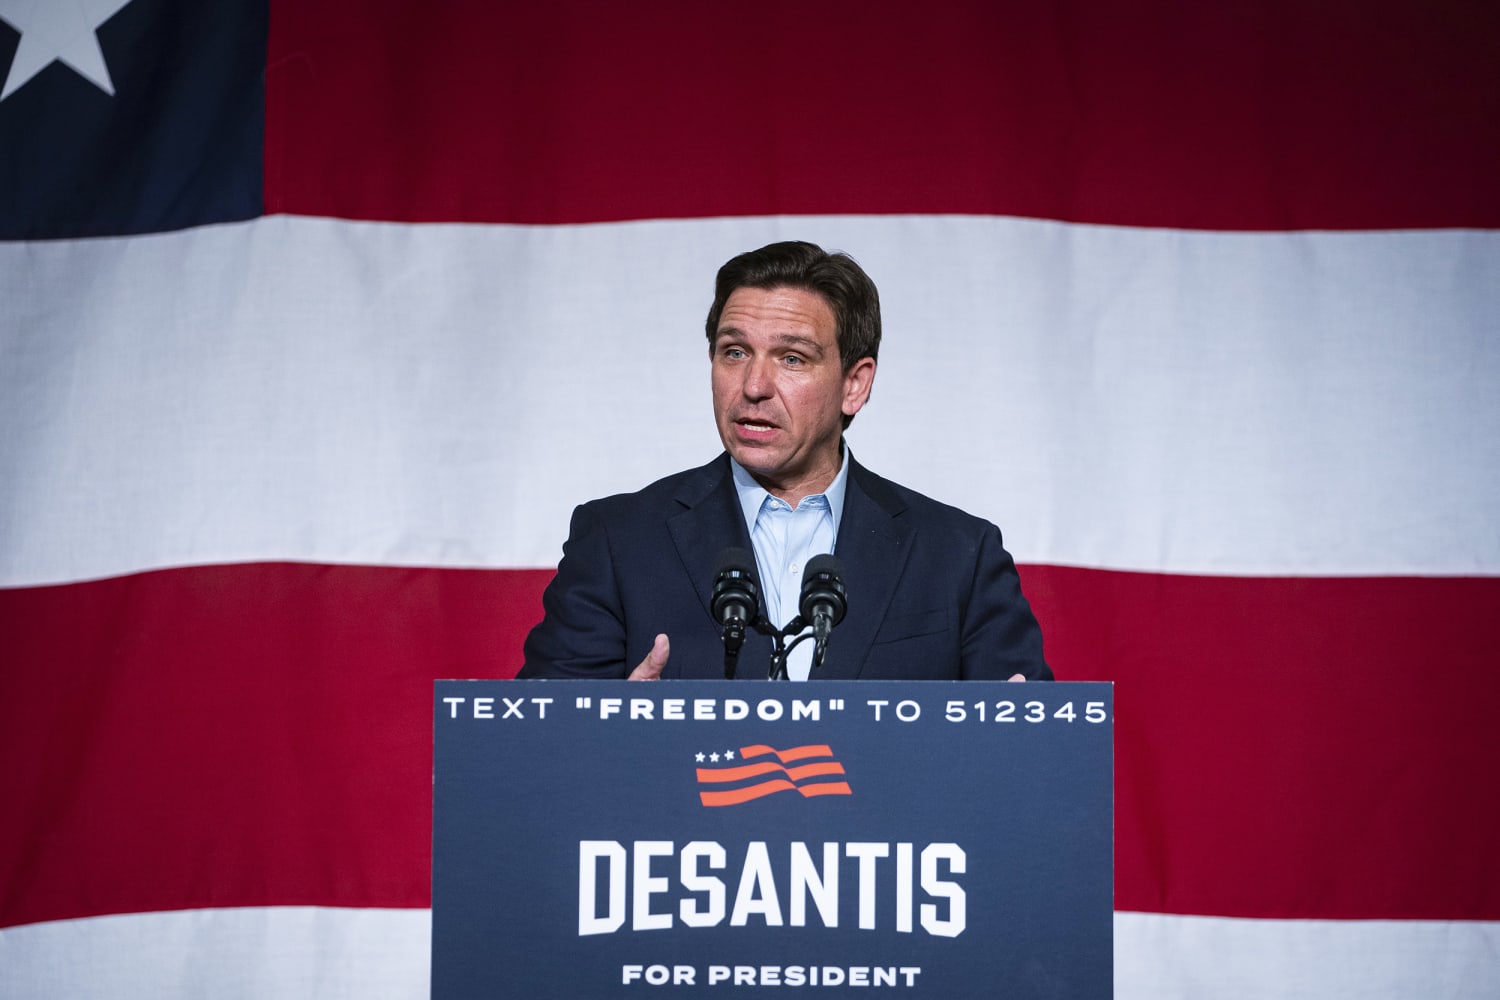 DeSantis says he would eliminate four federal agencies if elected president